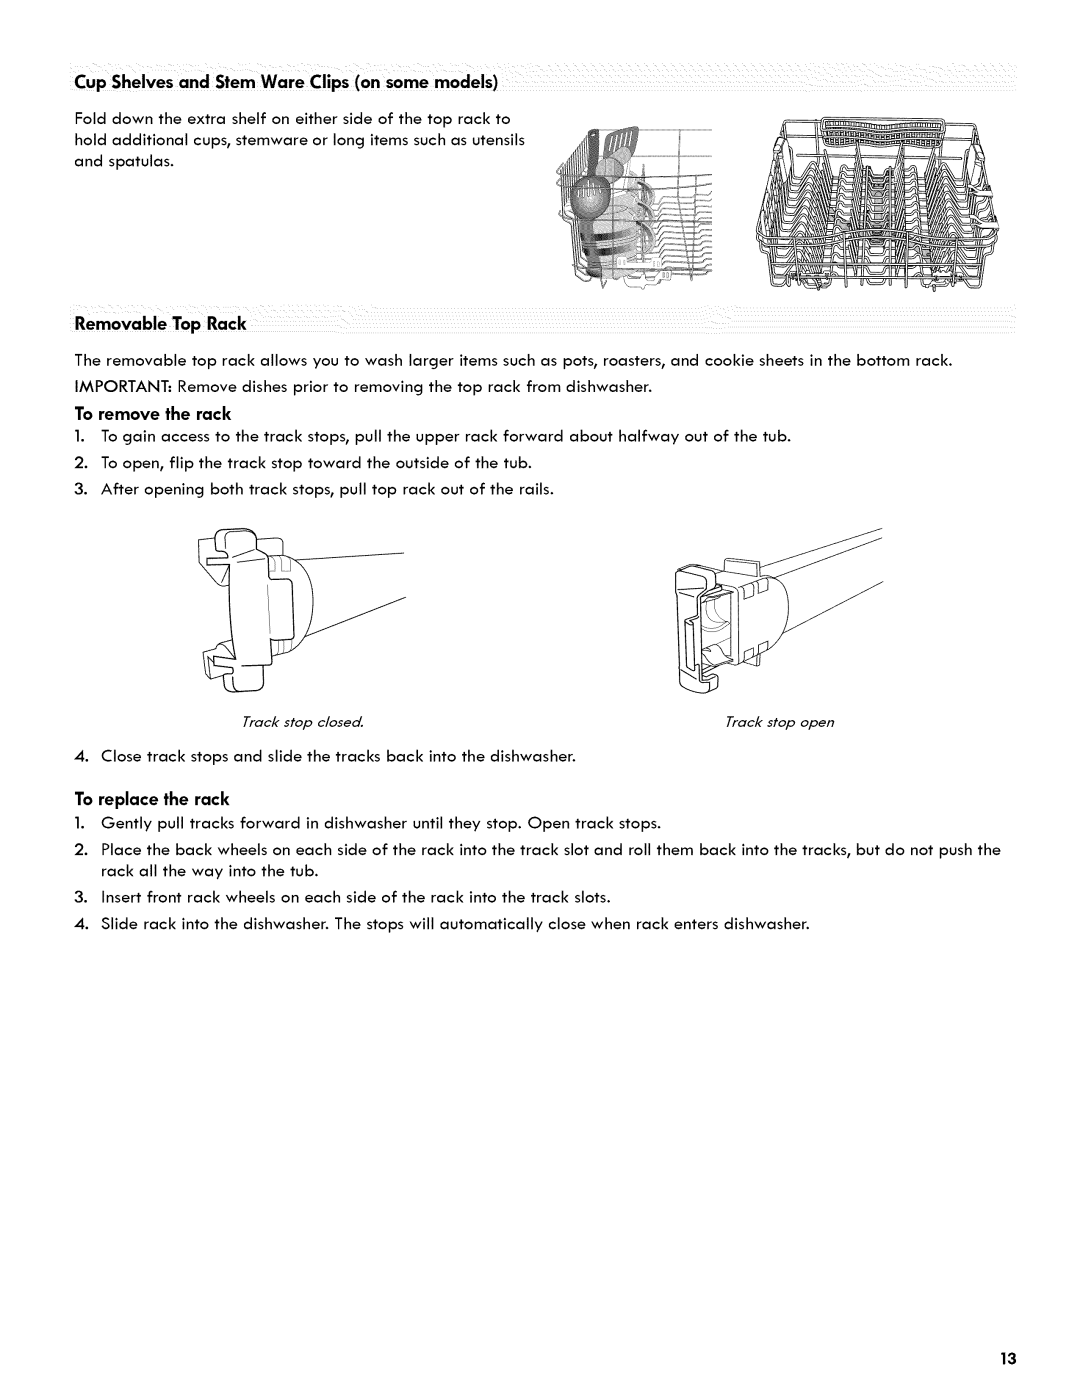 Kenmore 665.1404 manual To remove the rack, Removable Top Rack, Track stop dosed, To replace the rack 